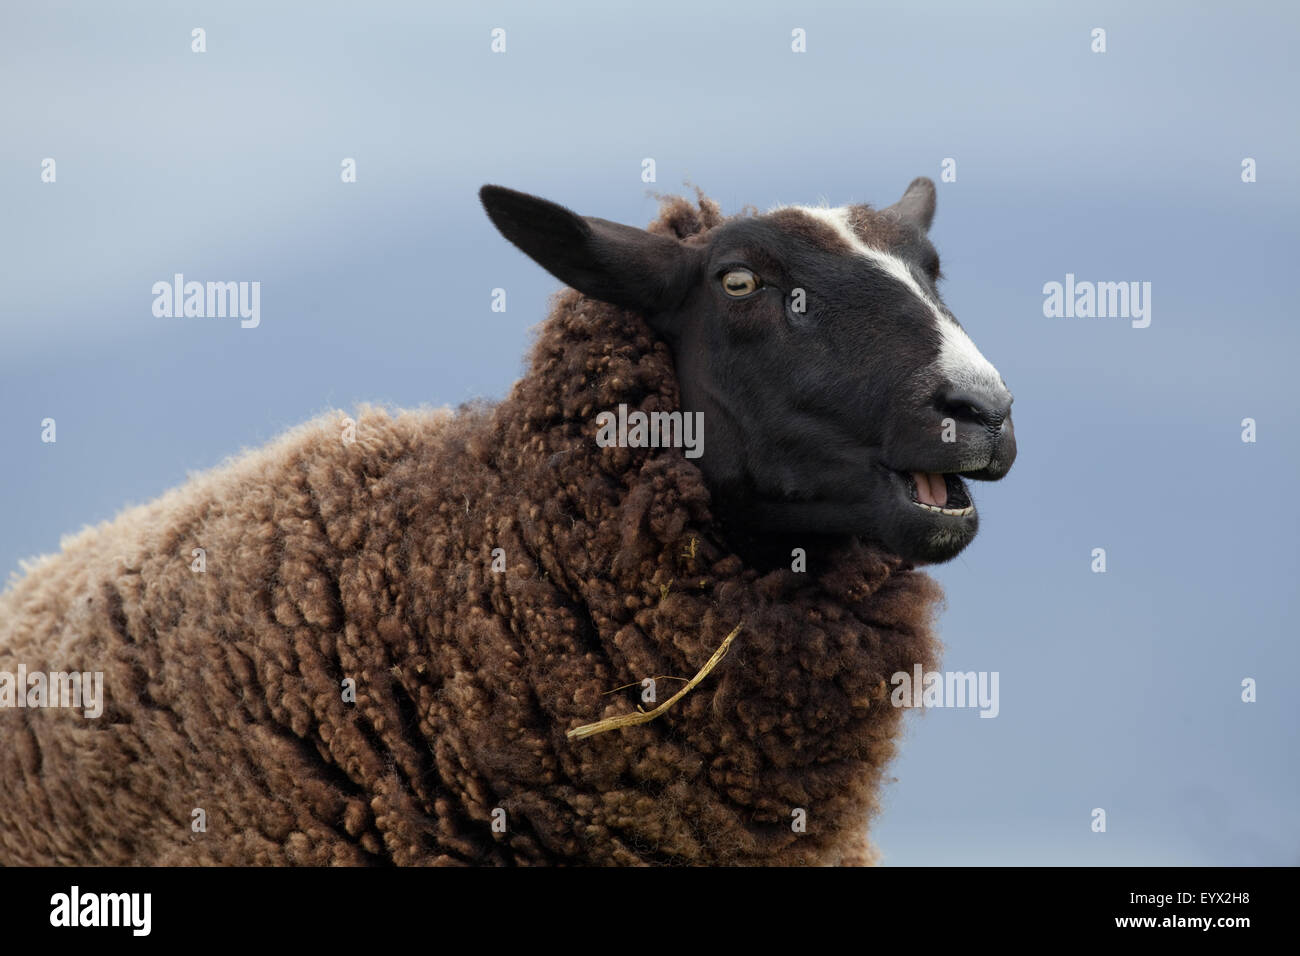 Swartbles Sheep. 'Chewing the cud'. Domestic breed originally from Friesland, north region of Netherlands. Iona, Scotland. Stock Photo